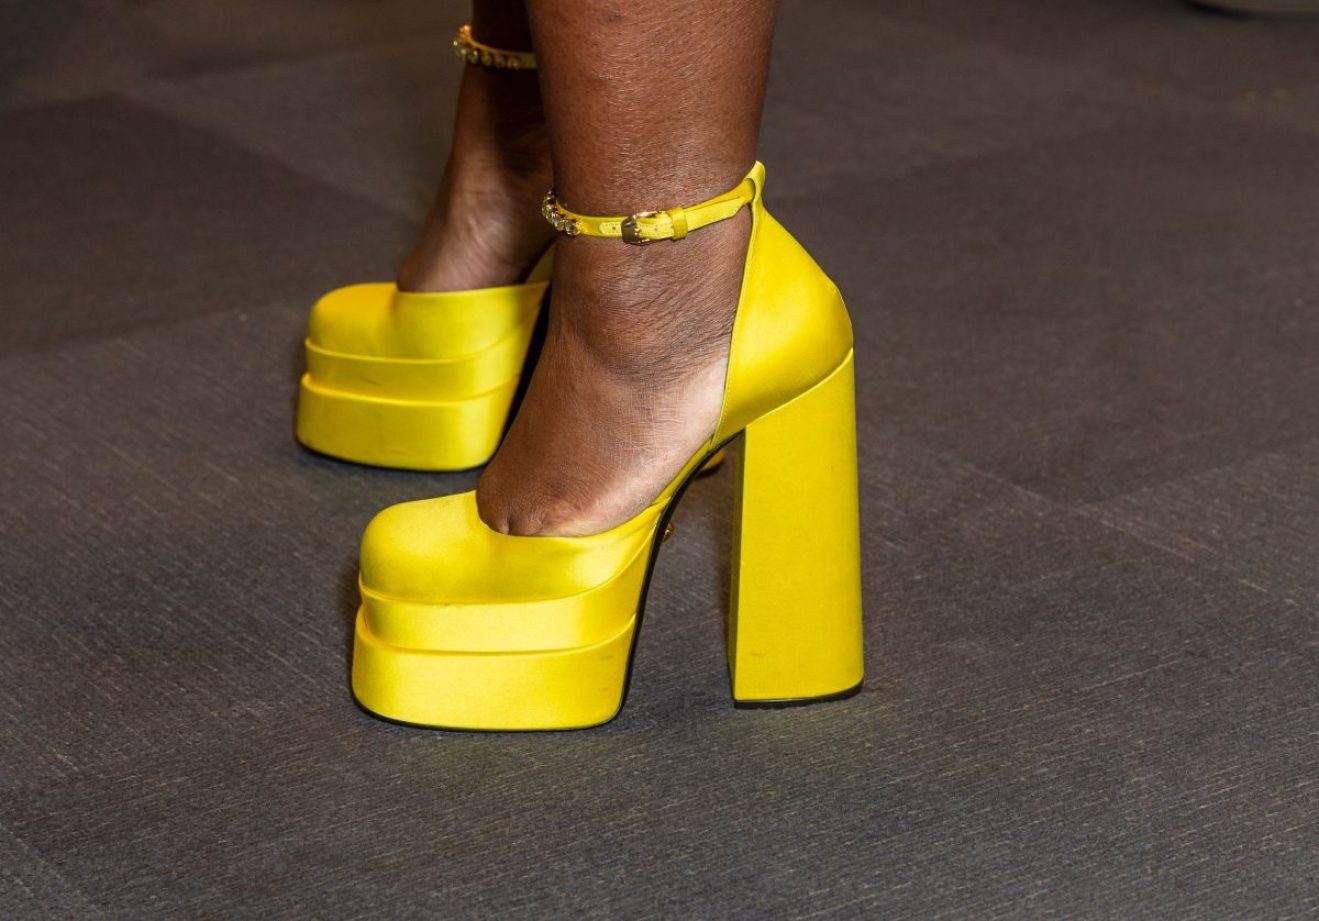 Versace Shoe Size Chart Are The Versace Heels Comfortable? The Shoe